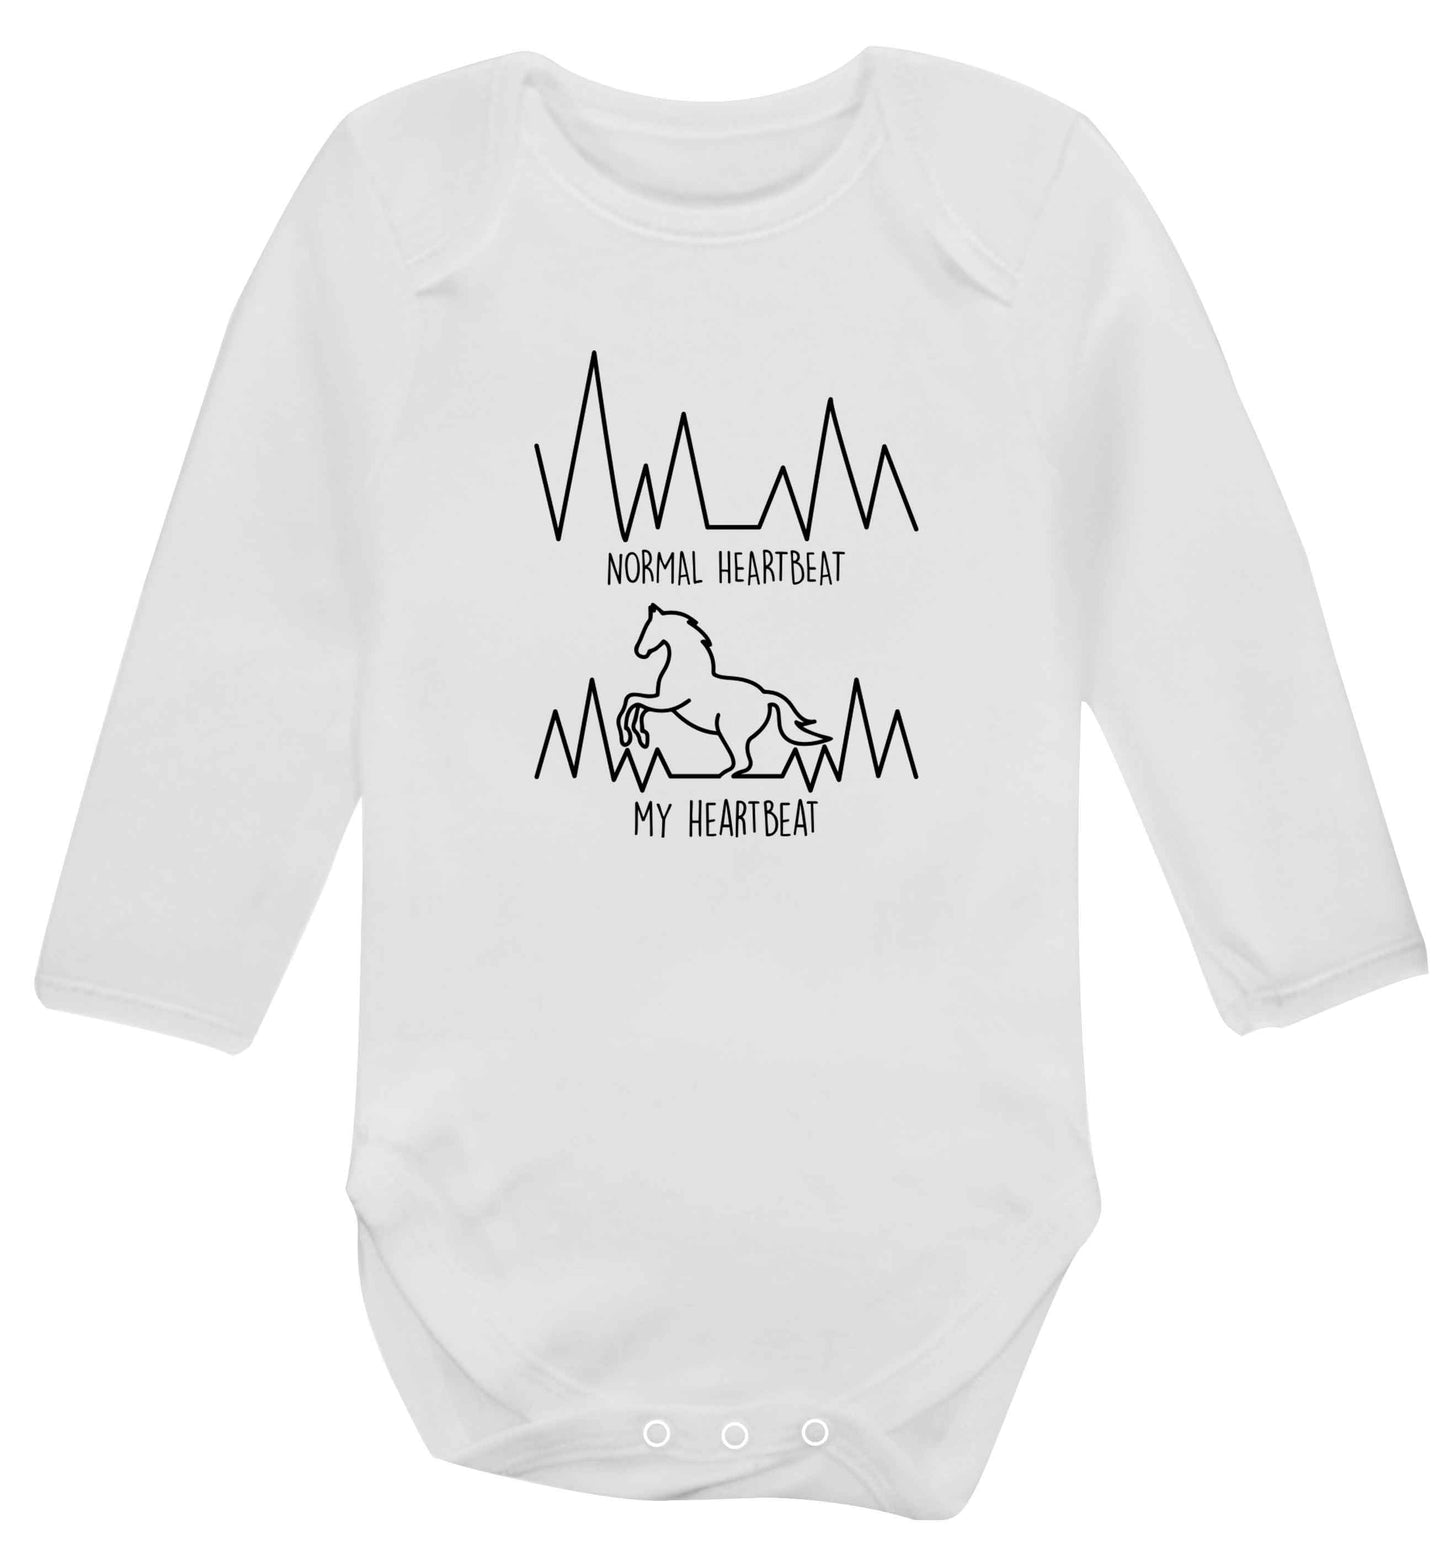 Horse - Normal heartbeat my heartbeat baby vest long sleeved white 6-12 months